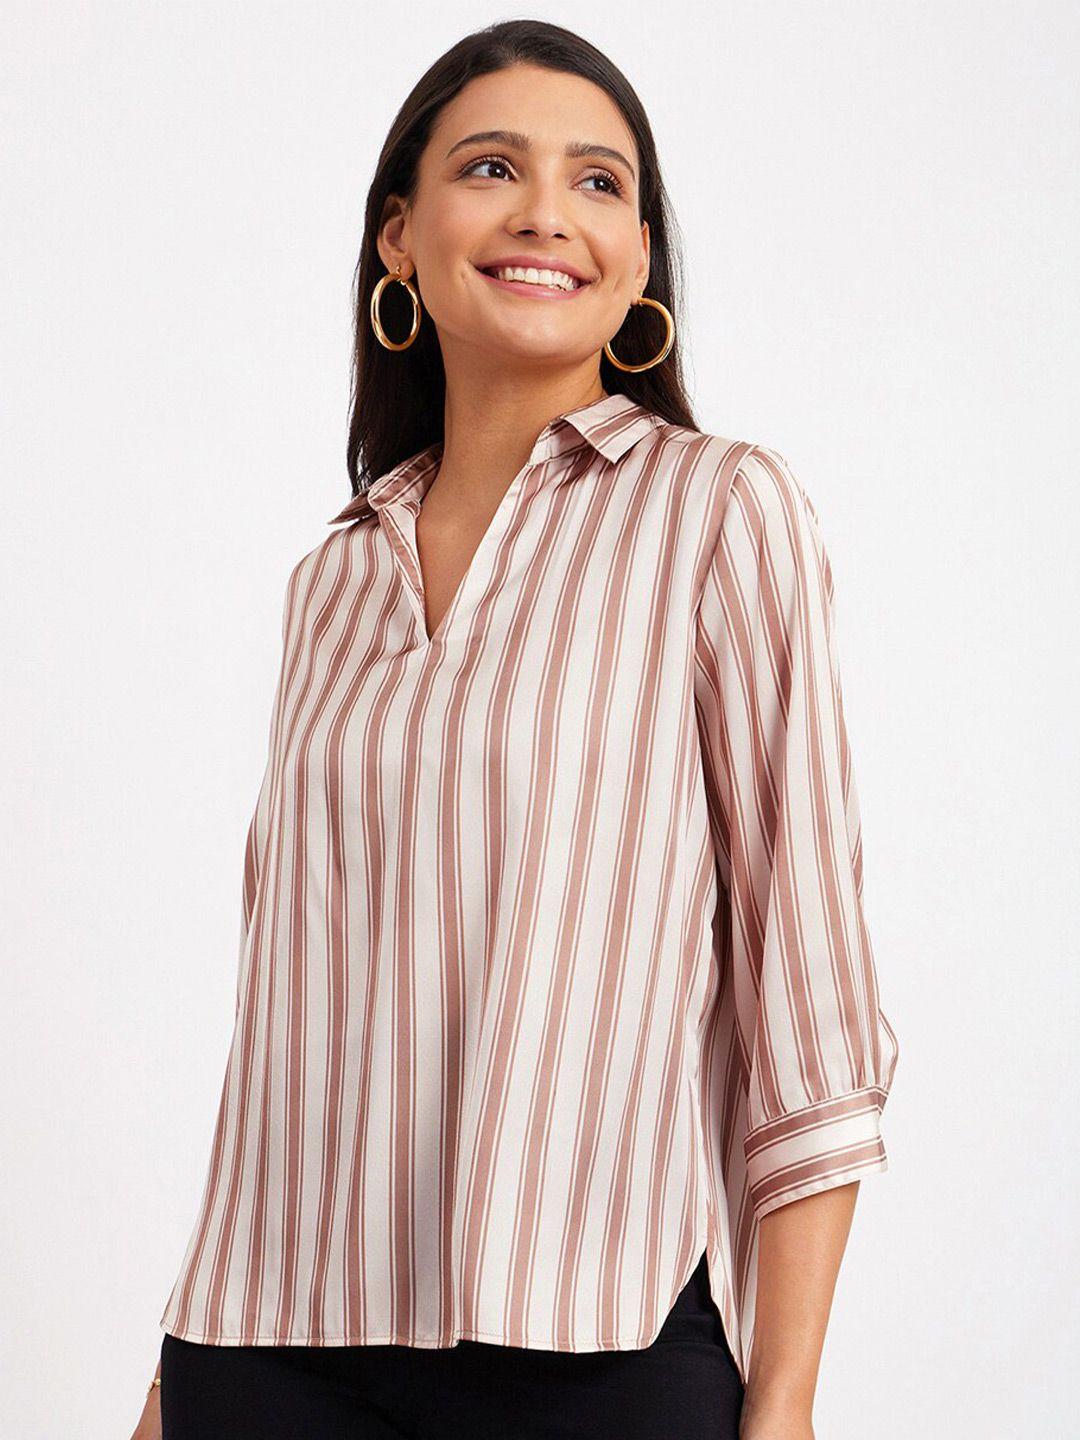 fablestreet striped satin shirt style top